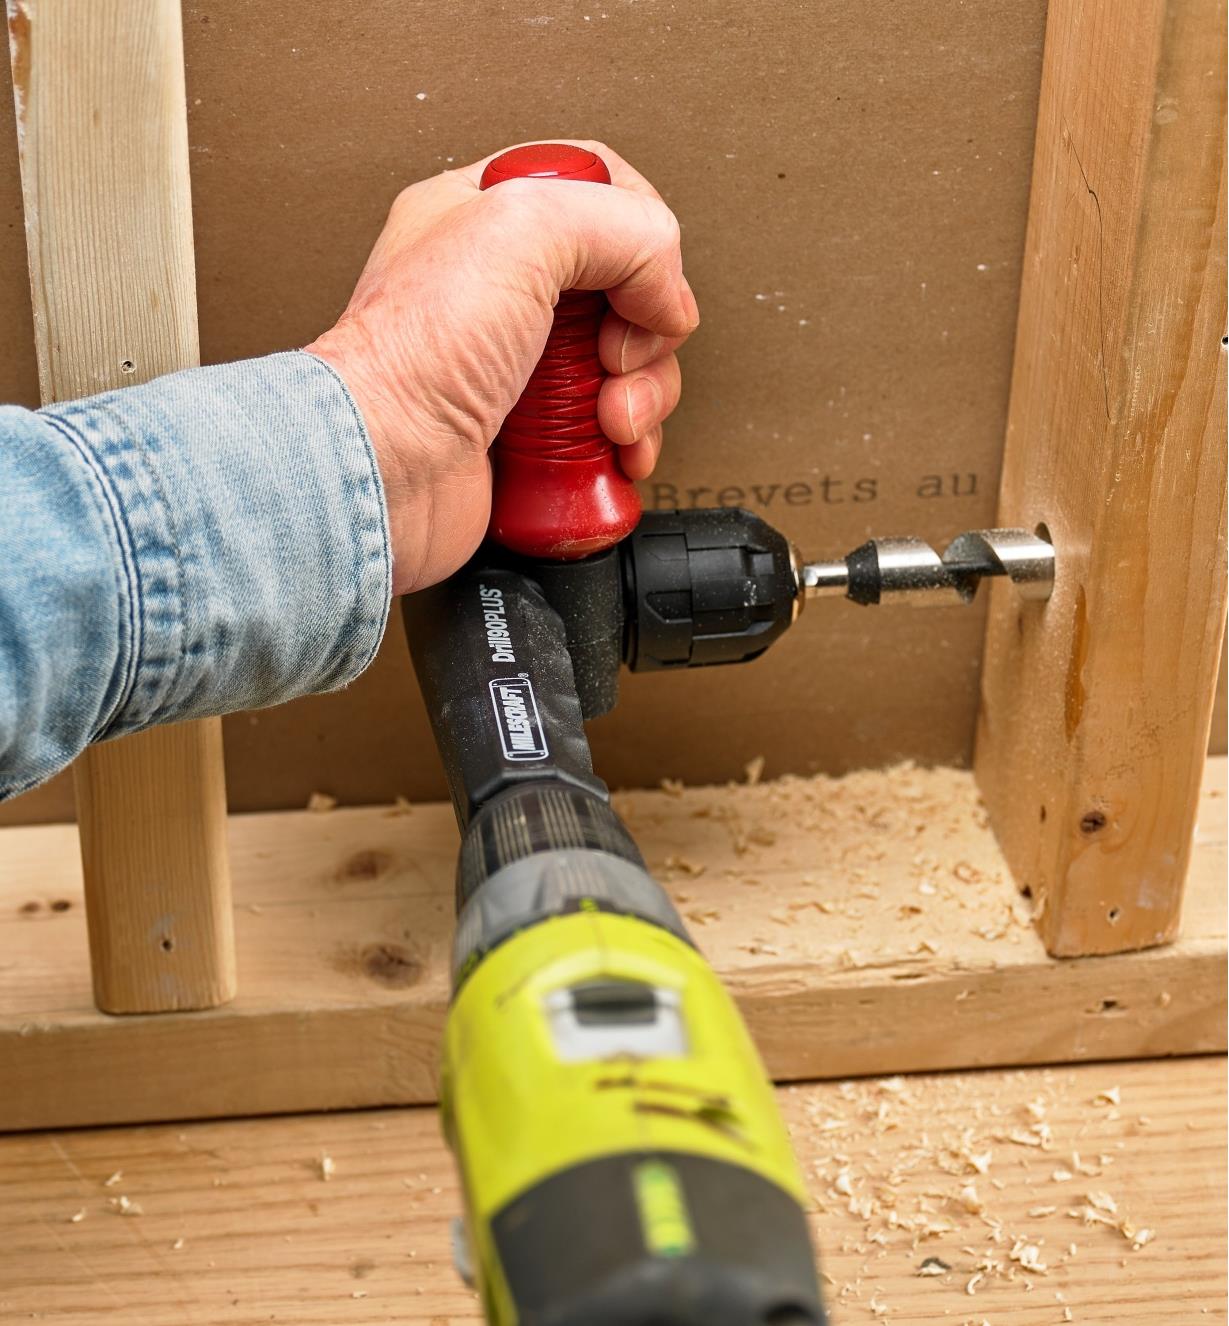 Boring a hole in a wall stud using the 90° drilling attachment on a standard drill